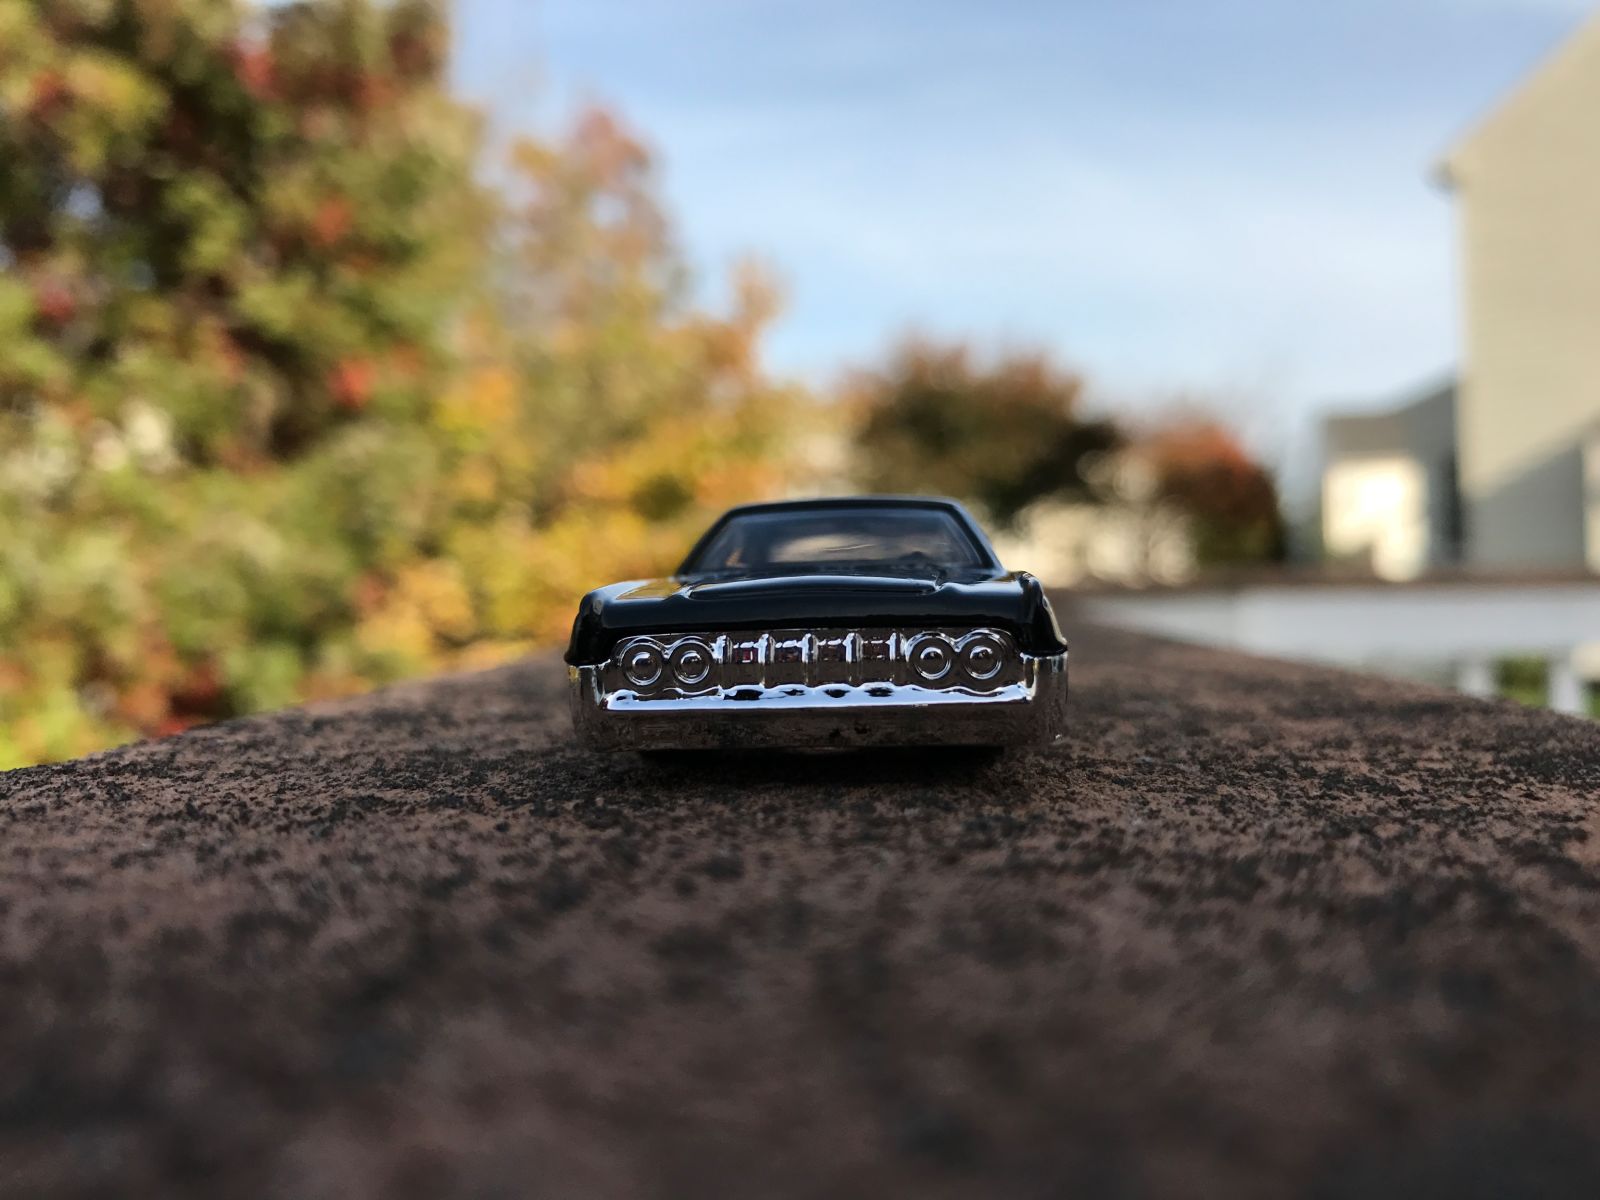 Illustration for article titled Halloween Car: Lincoln Continental